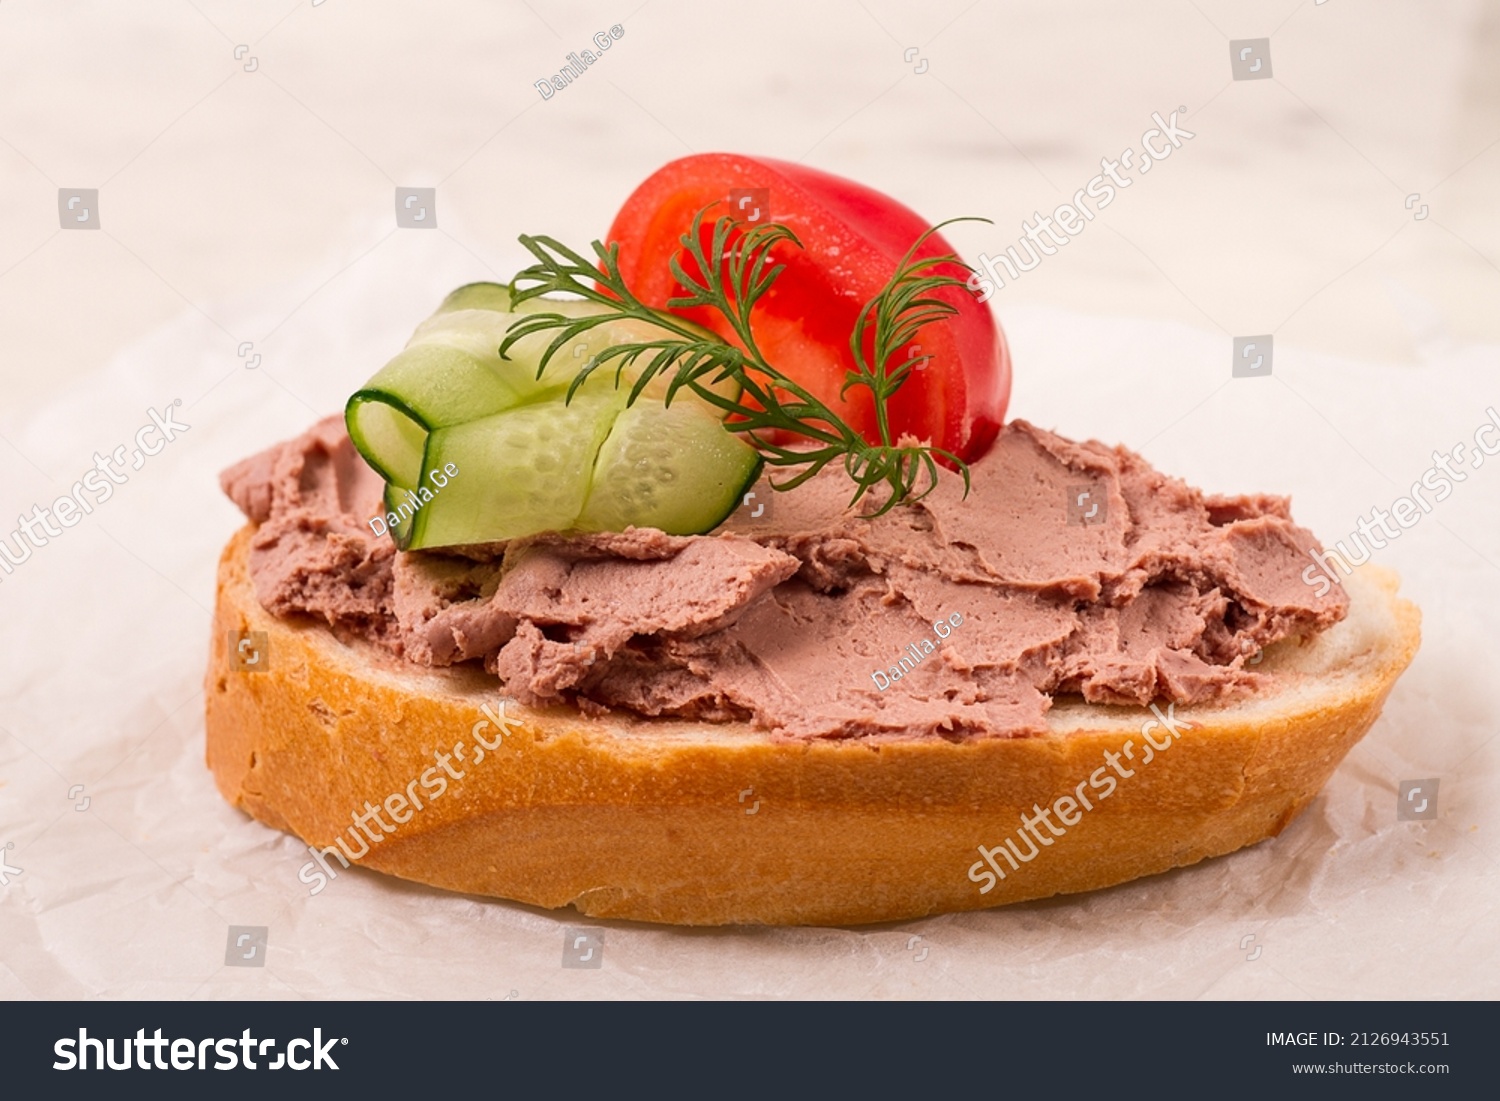 Liver meat pate spread, on white bread, on a light background, breakfast, close-up, no people, selective focus, pasticcio, pastete, #2126943551